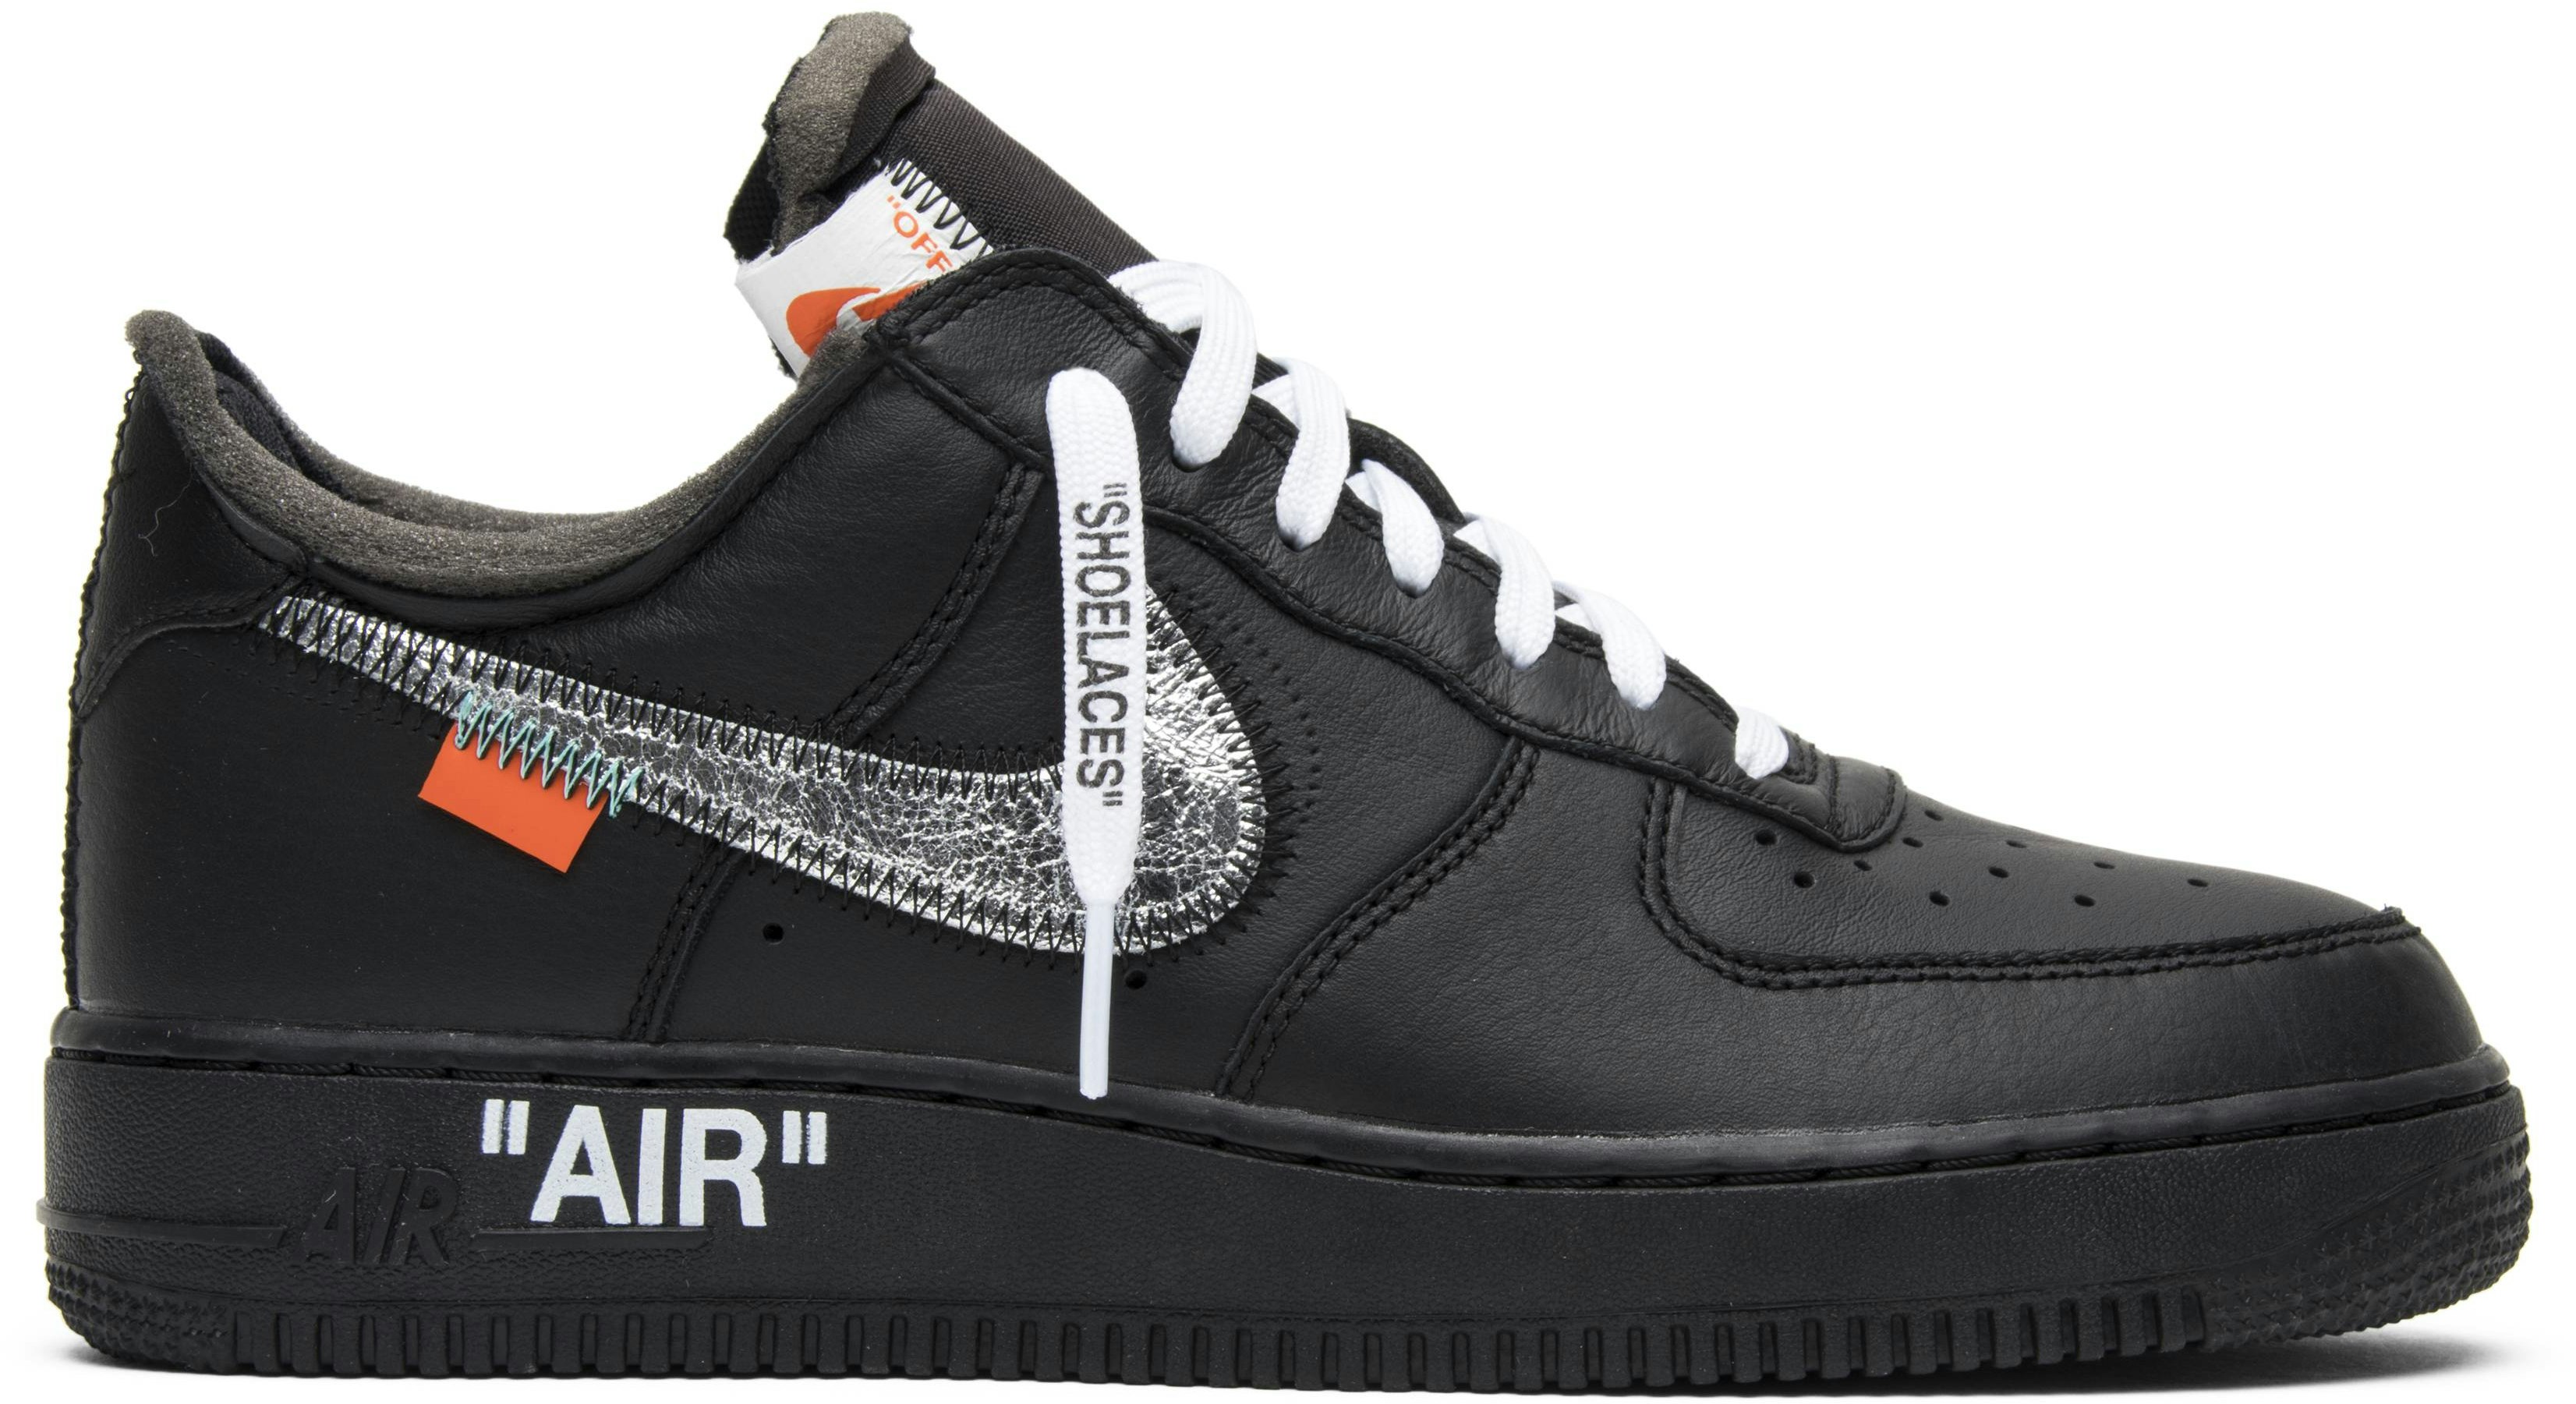 100% AUTHENTIC NIKE OFF-WHITE X AIR FORCE 1 LOW '07 MOMA